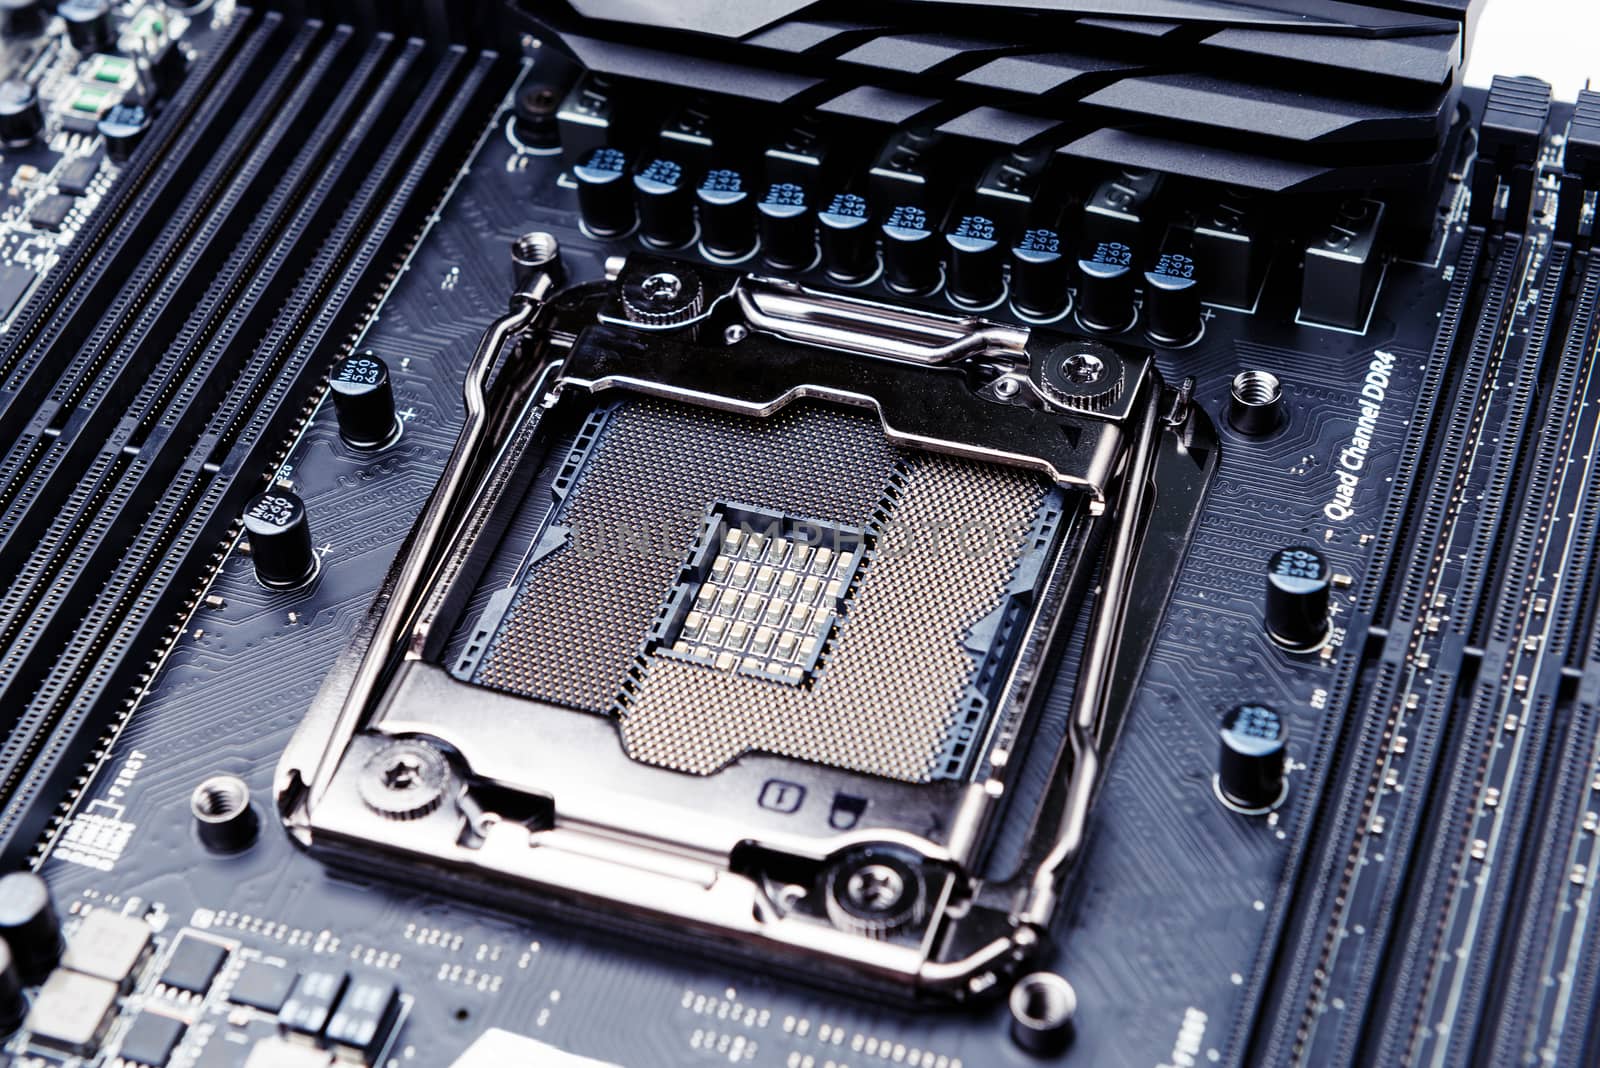 CPU socket on the motherboard. Toned image by Draw05